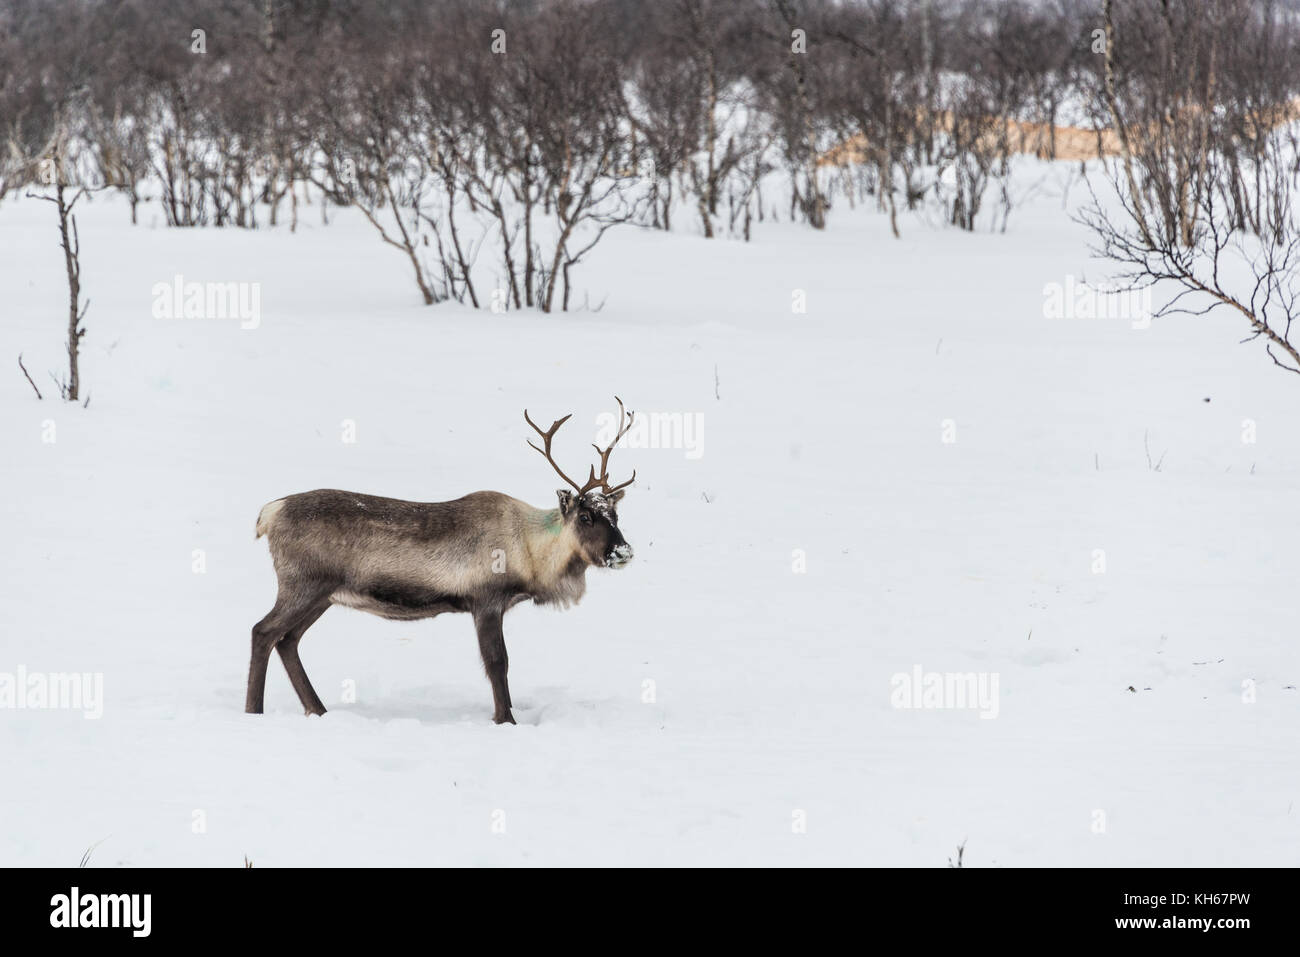 Reindeer  in winter, Lapland, Northern Finland- space for text Stock Photo